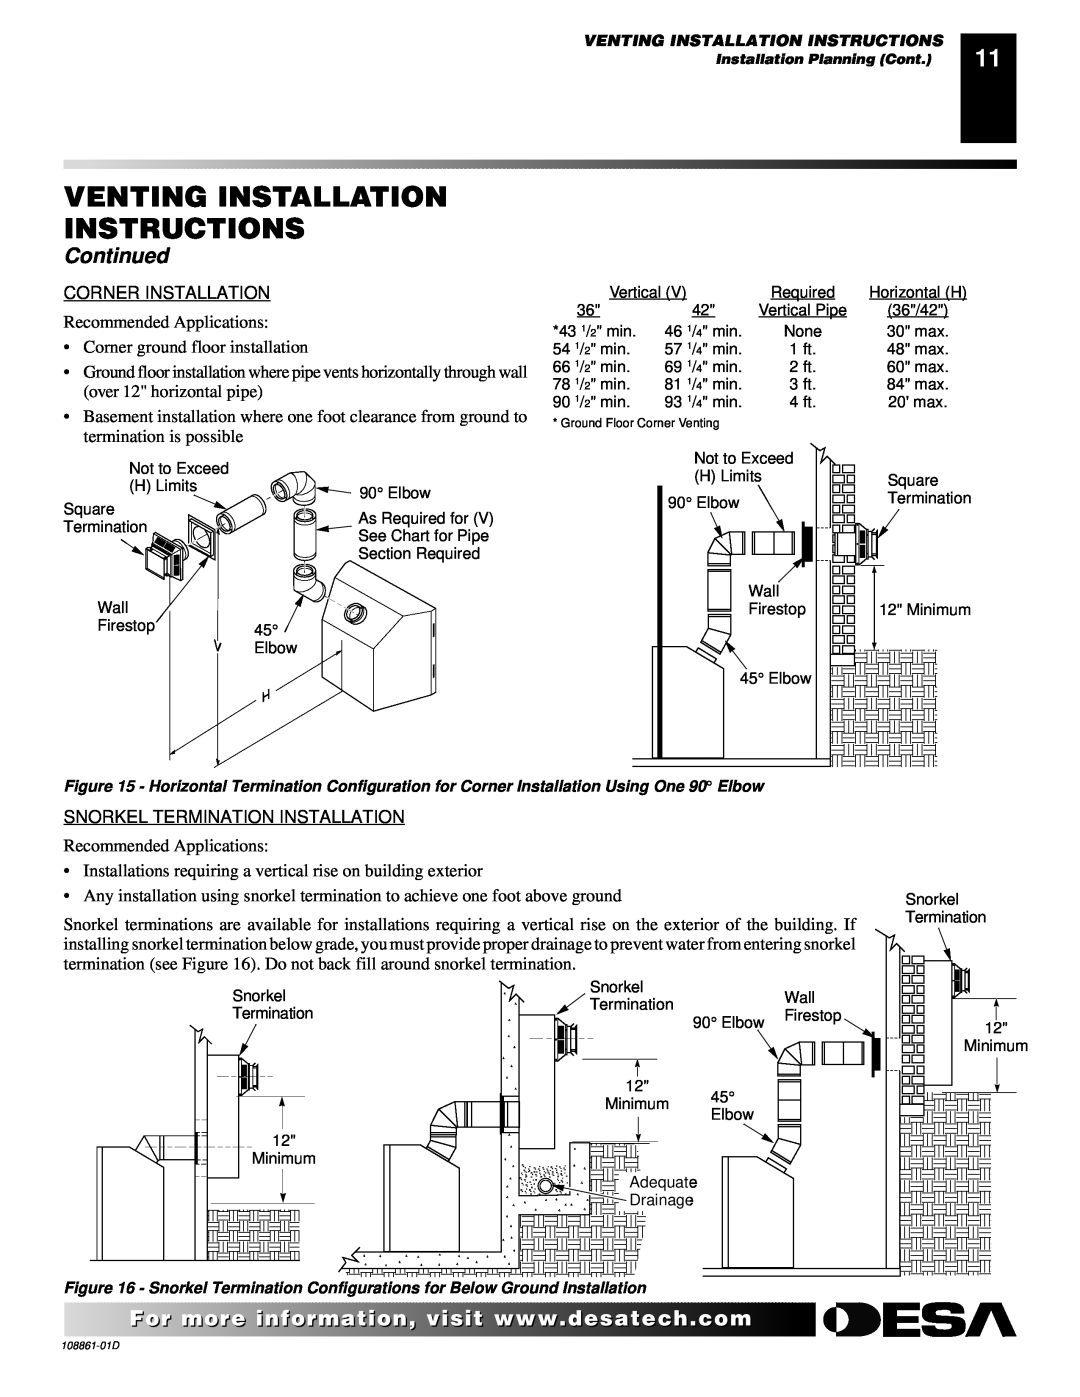 Desa (V)V42N, (V)V42P, (V)V36P, CHDV36NR, CHDV42NR Venting Installation Instructions, Continued, Recommended Applications 